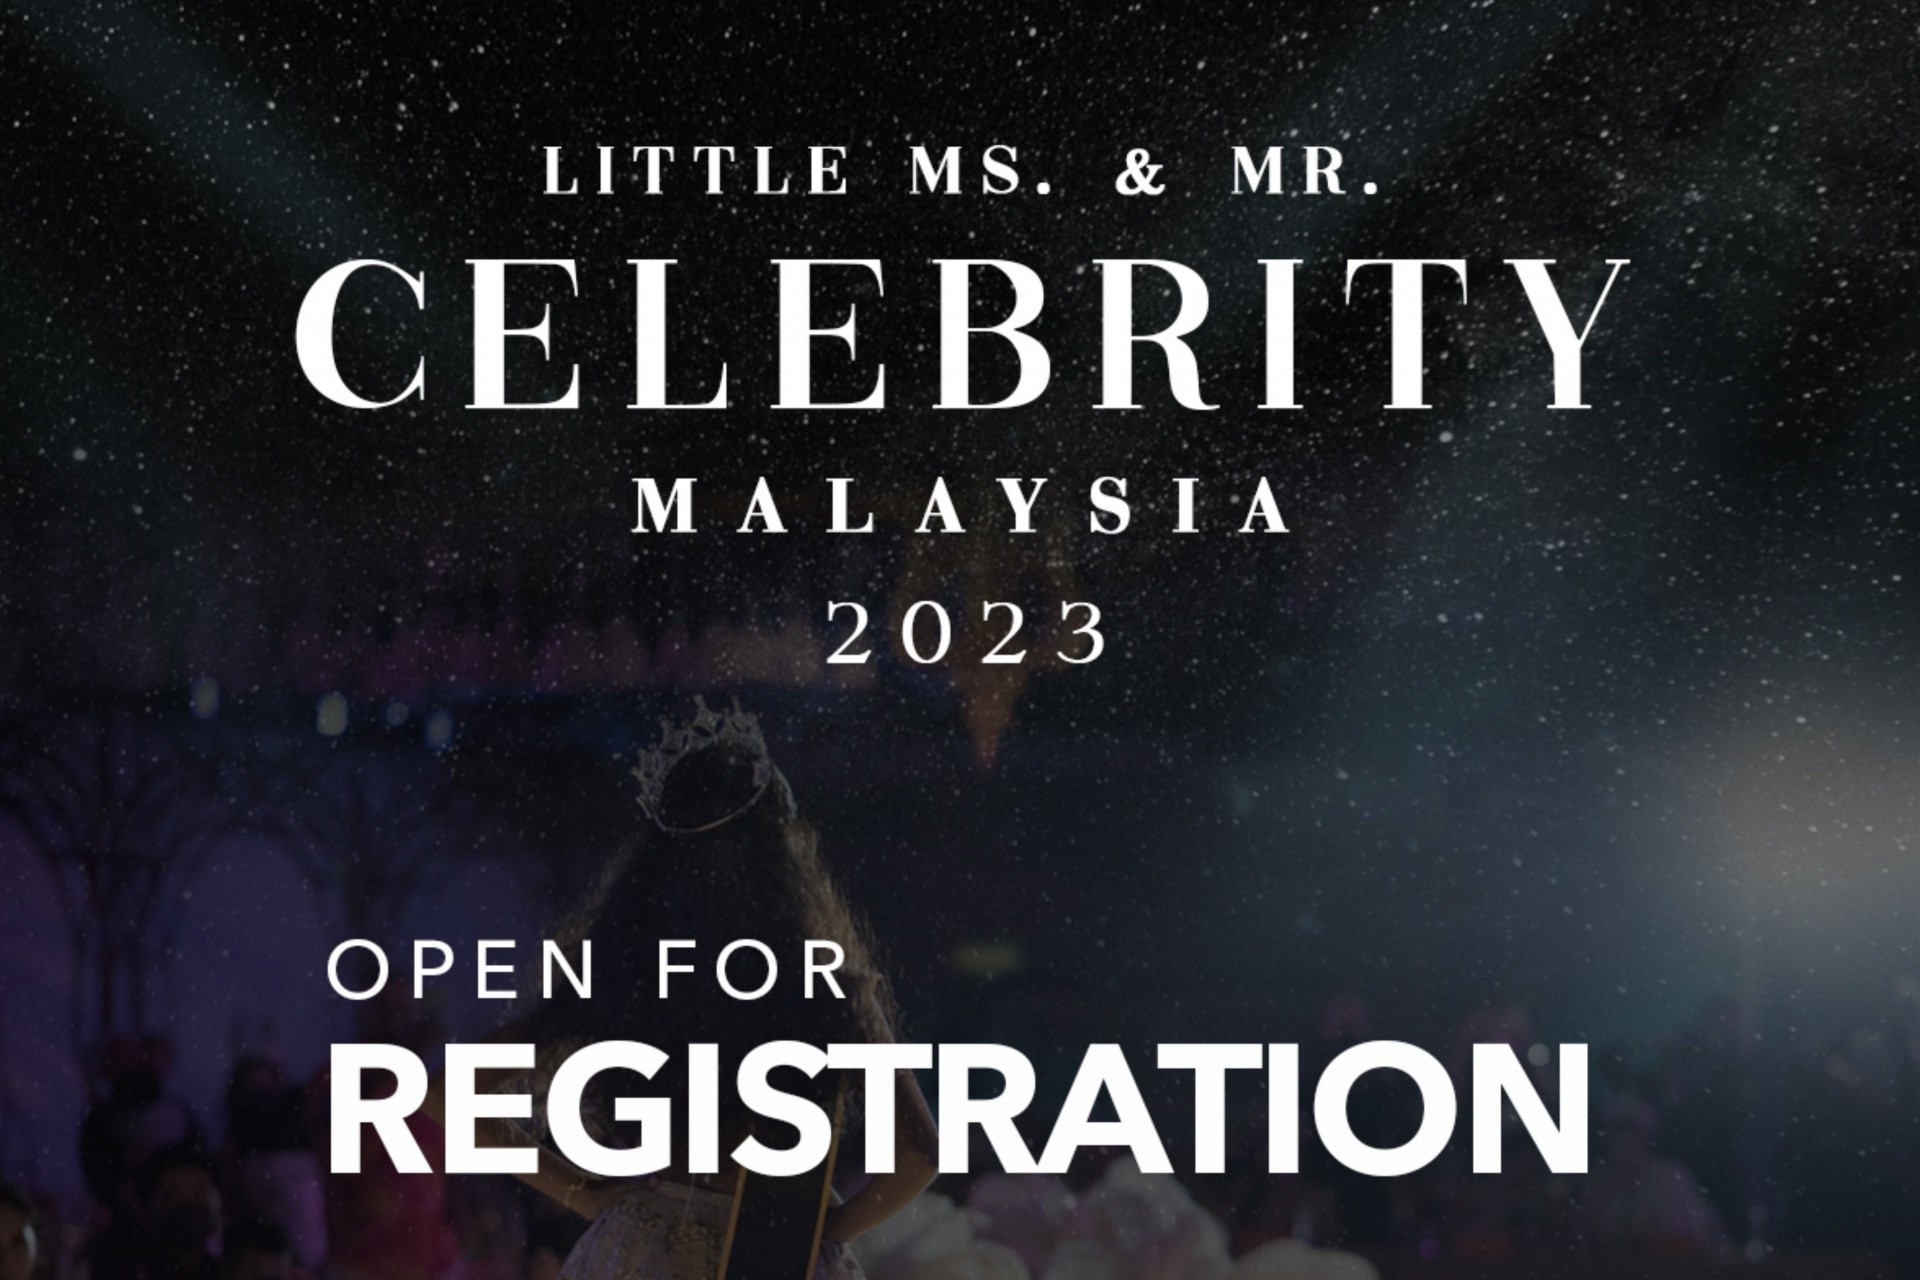 Little Miss & Mister Celebrity Malaysia 2023 registration opens